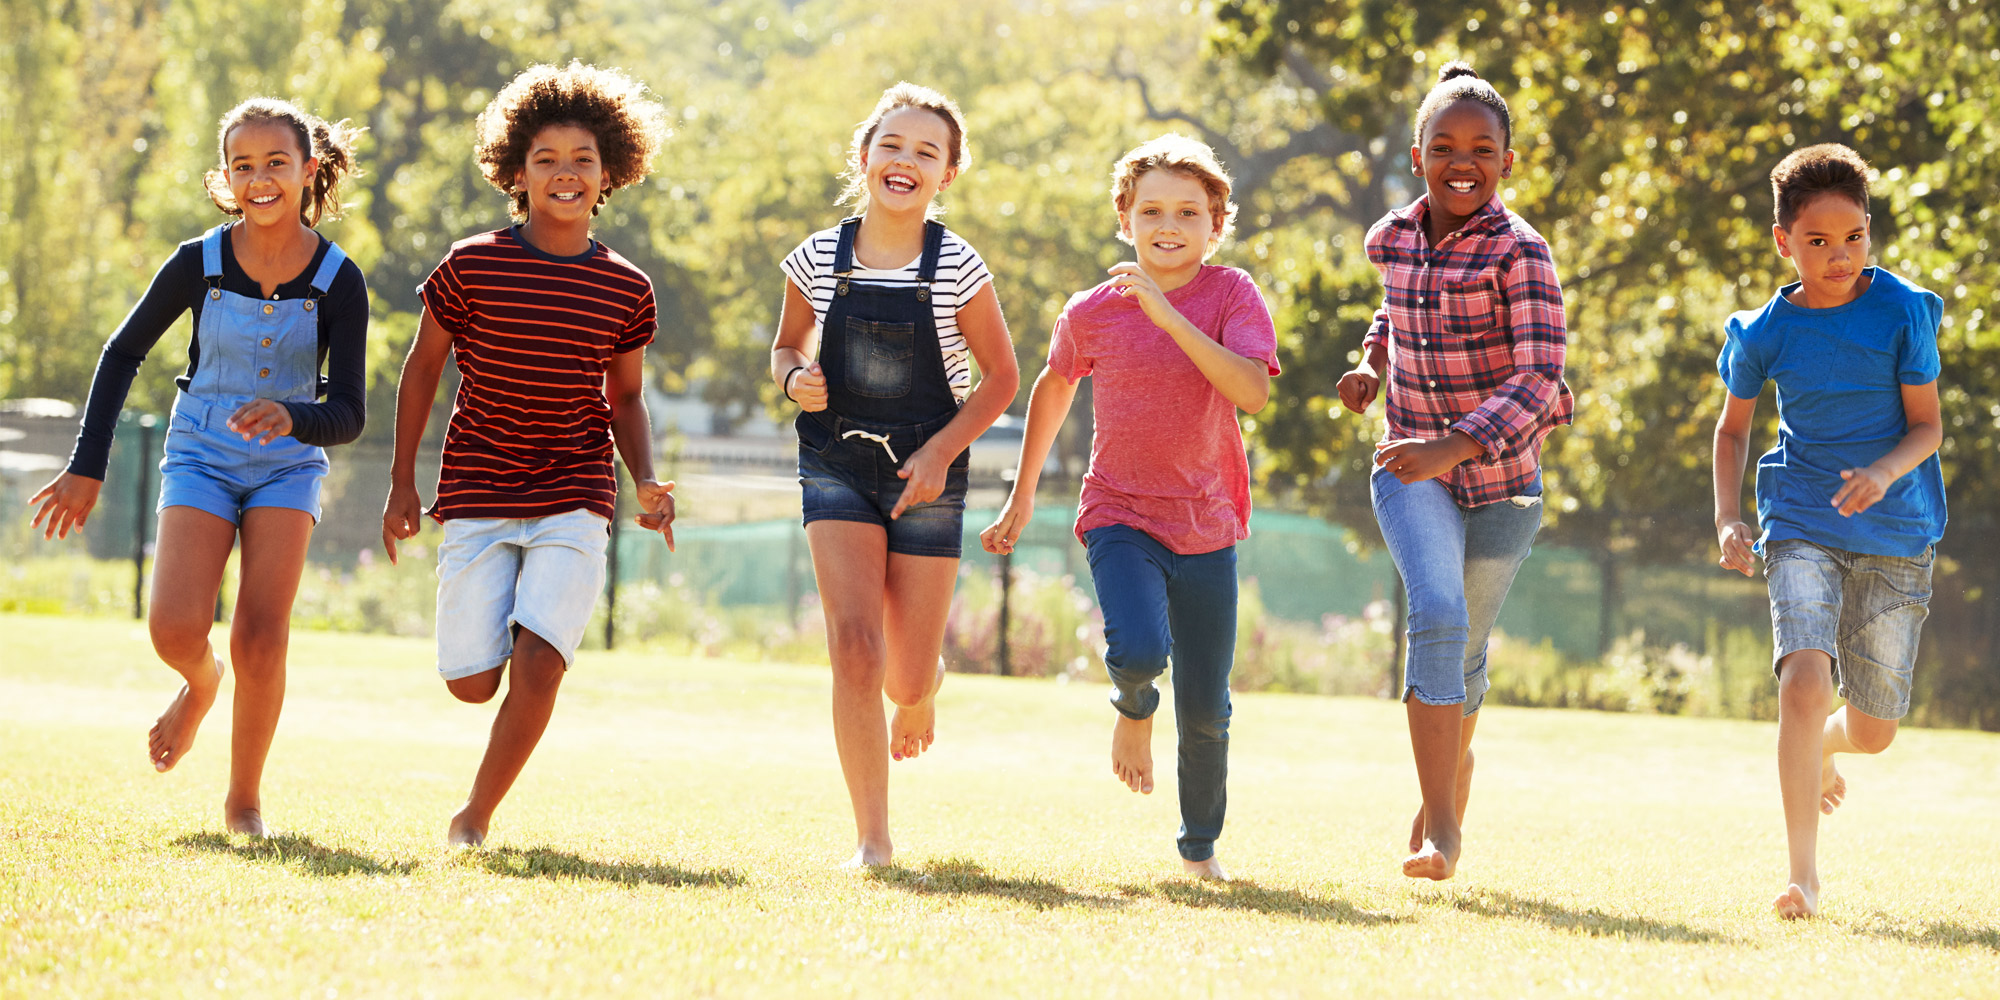 ukactive calls on Government to use childcare cash surplus to get disadvantaged kids active